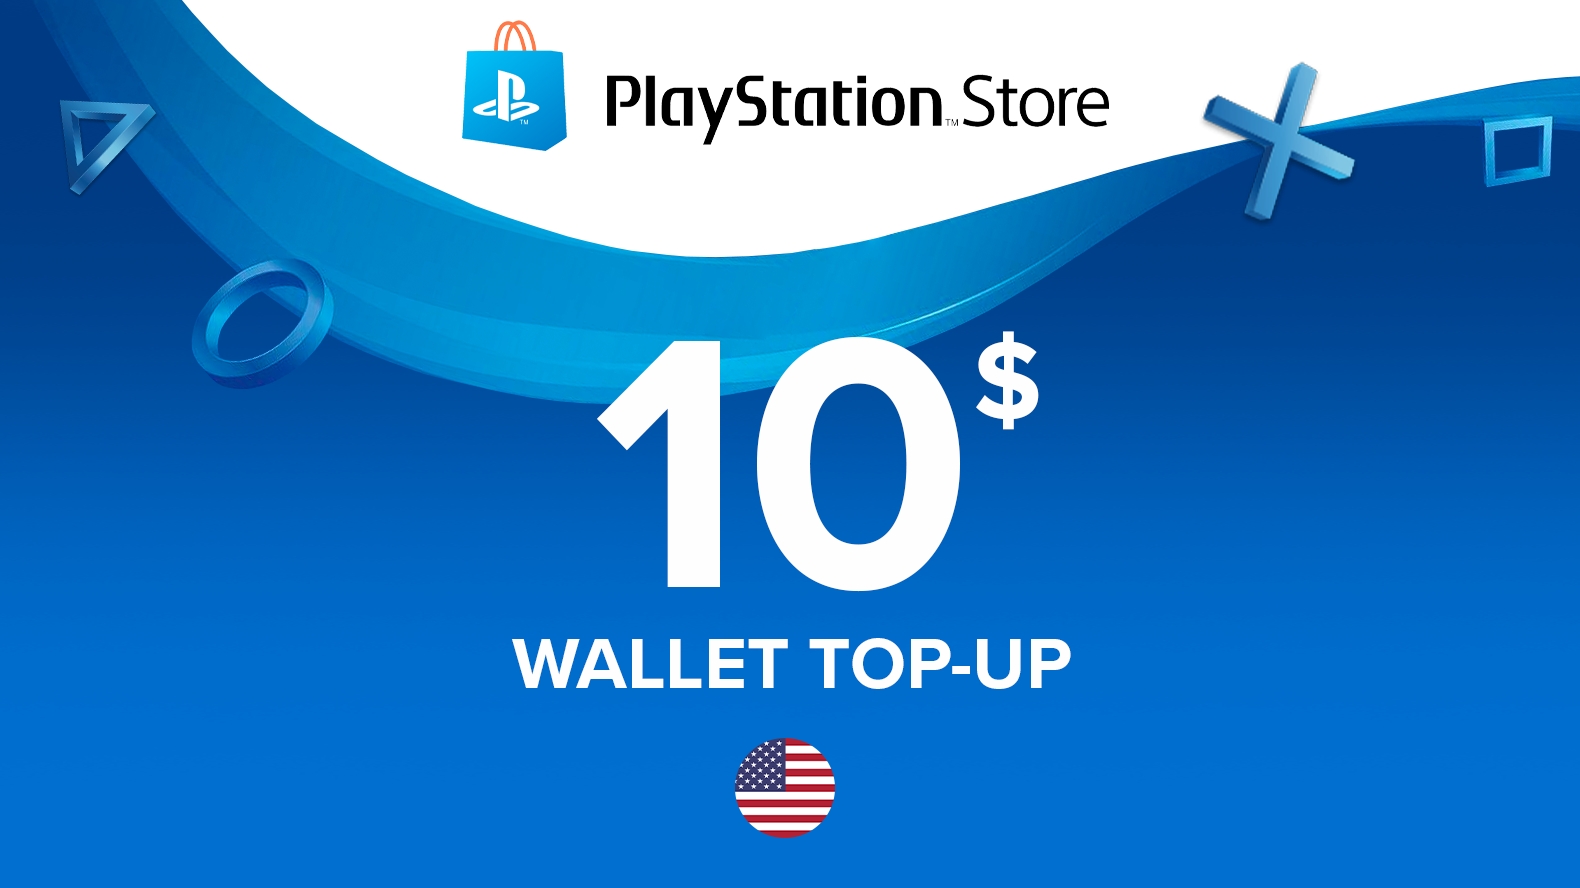 cheap games on playstation store